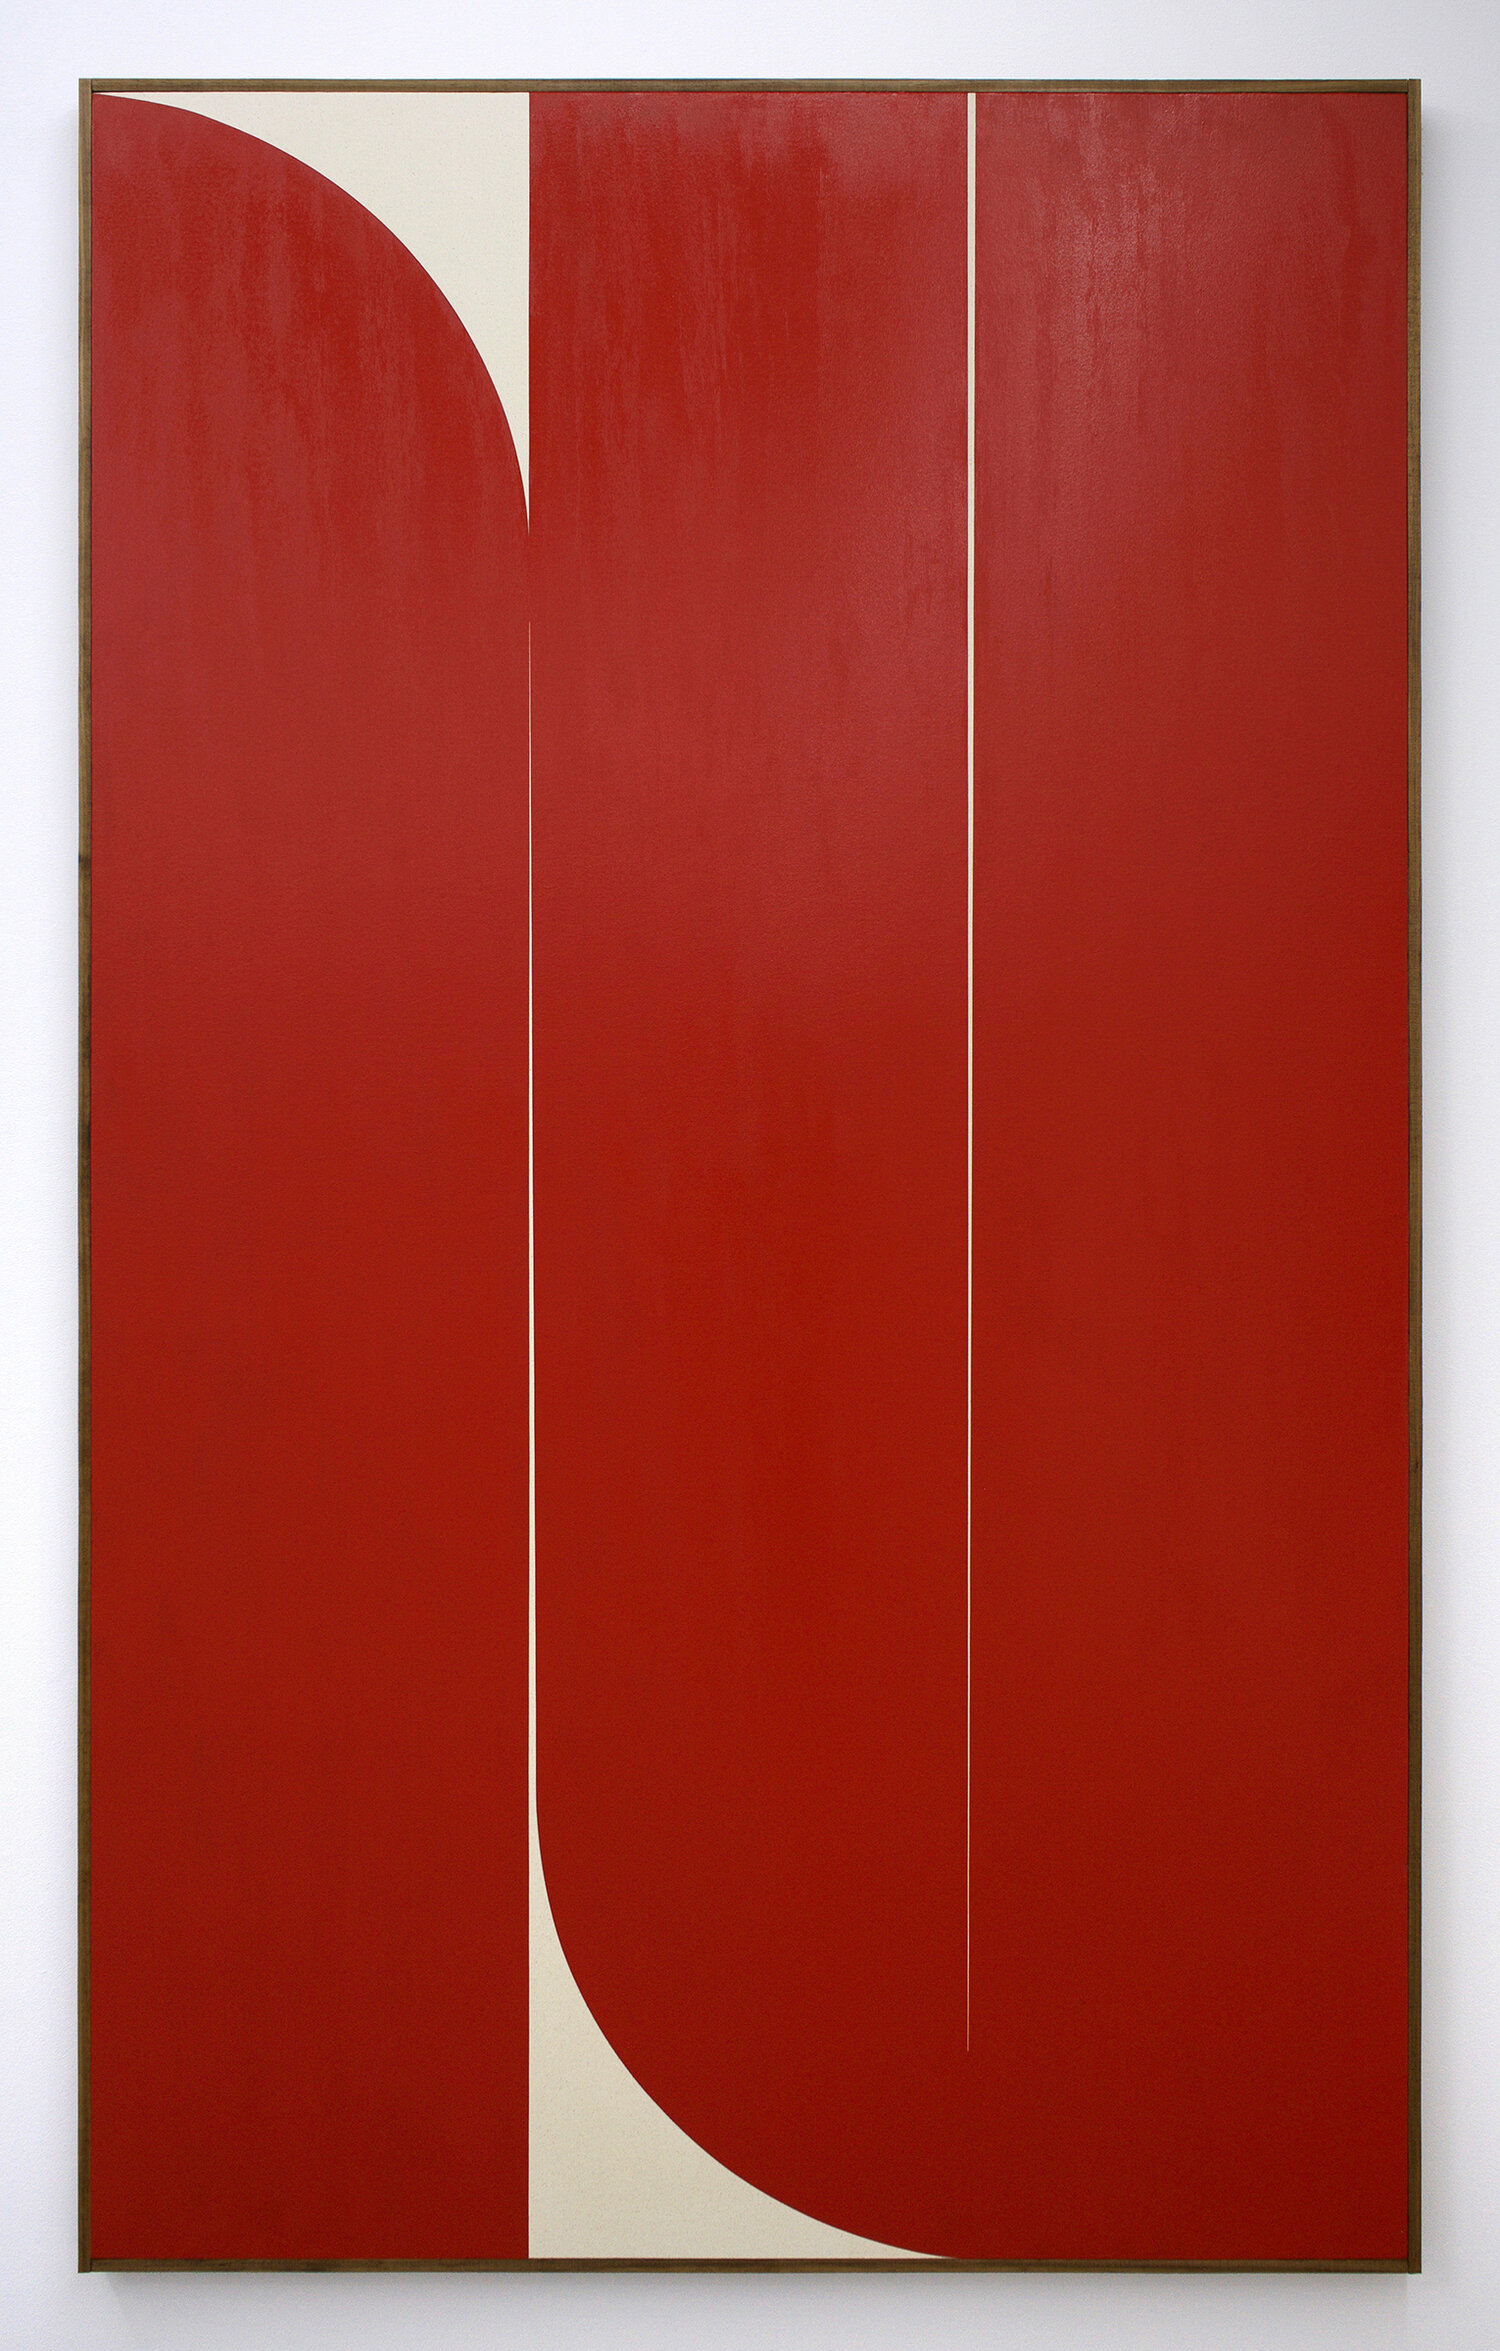  JOHNNY ABRAHAMS Untitled (Red), 2019 oil on canvas, 80” x 48” 